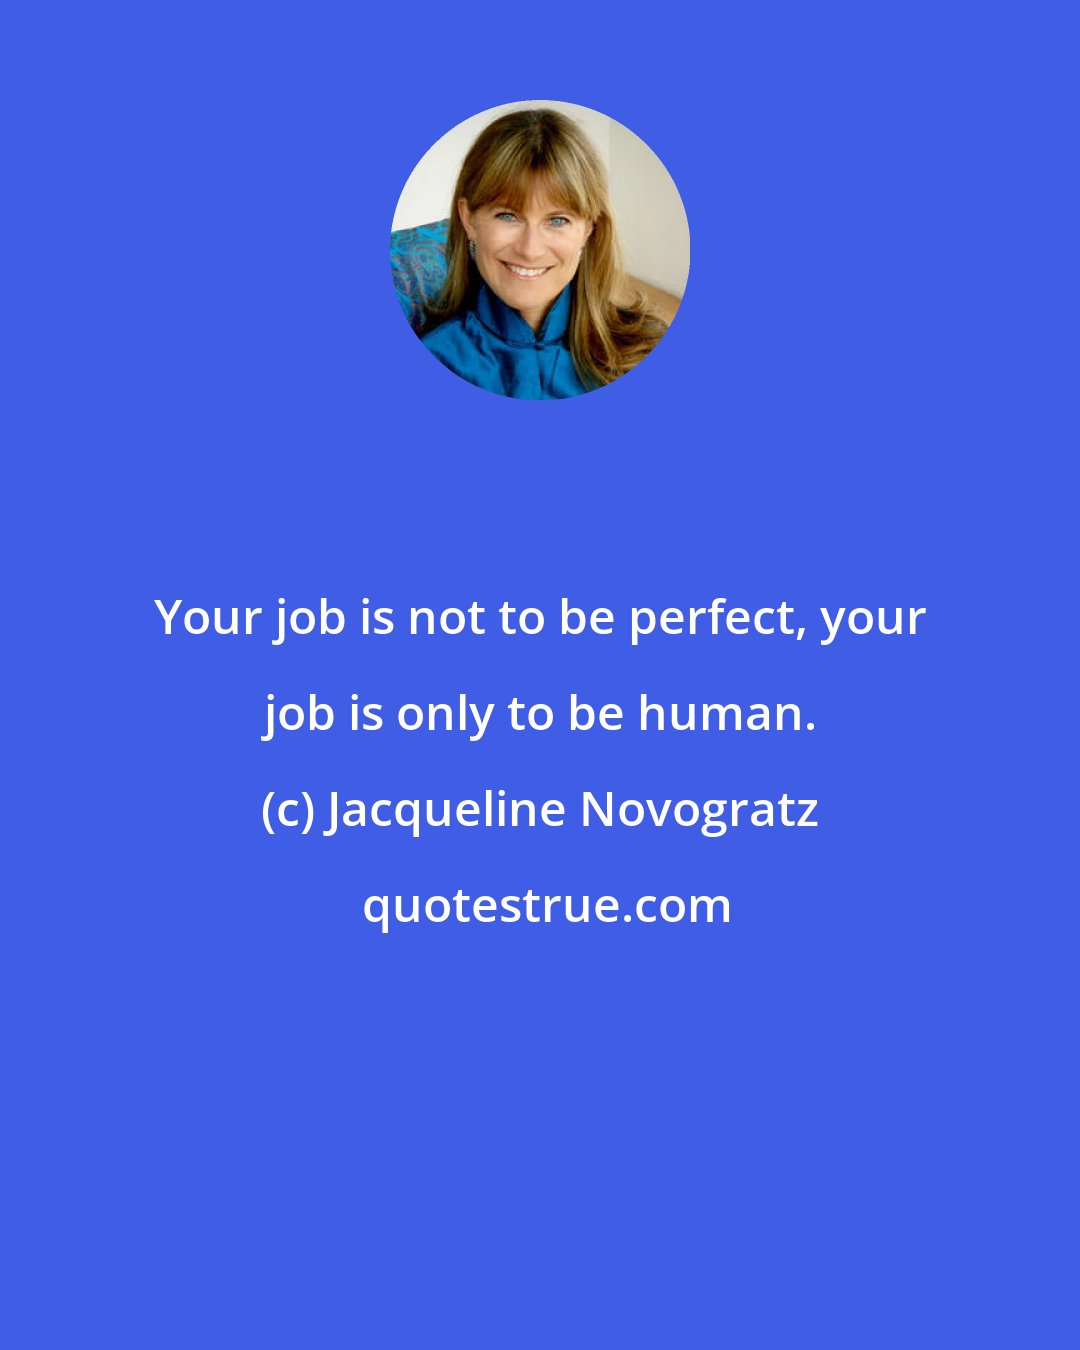 Jacqueline Novogratz: Your job is not to be perfect, your job is only to be human.